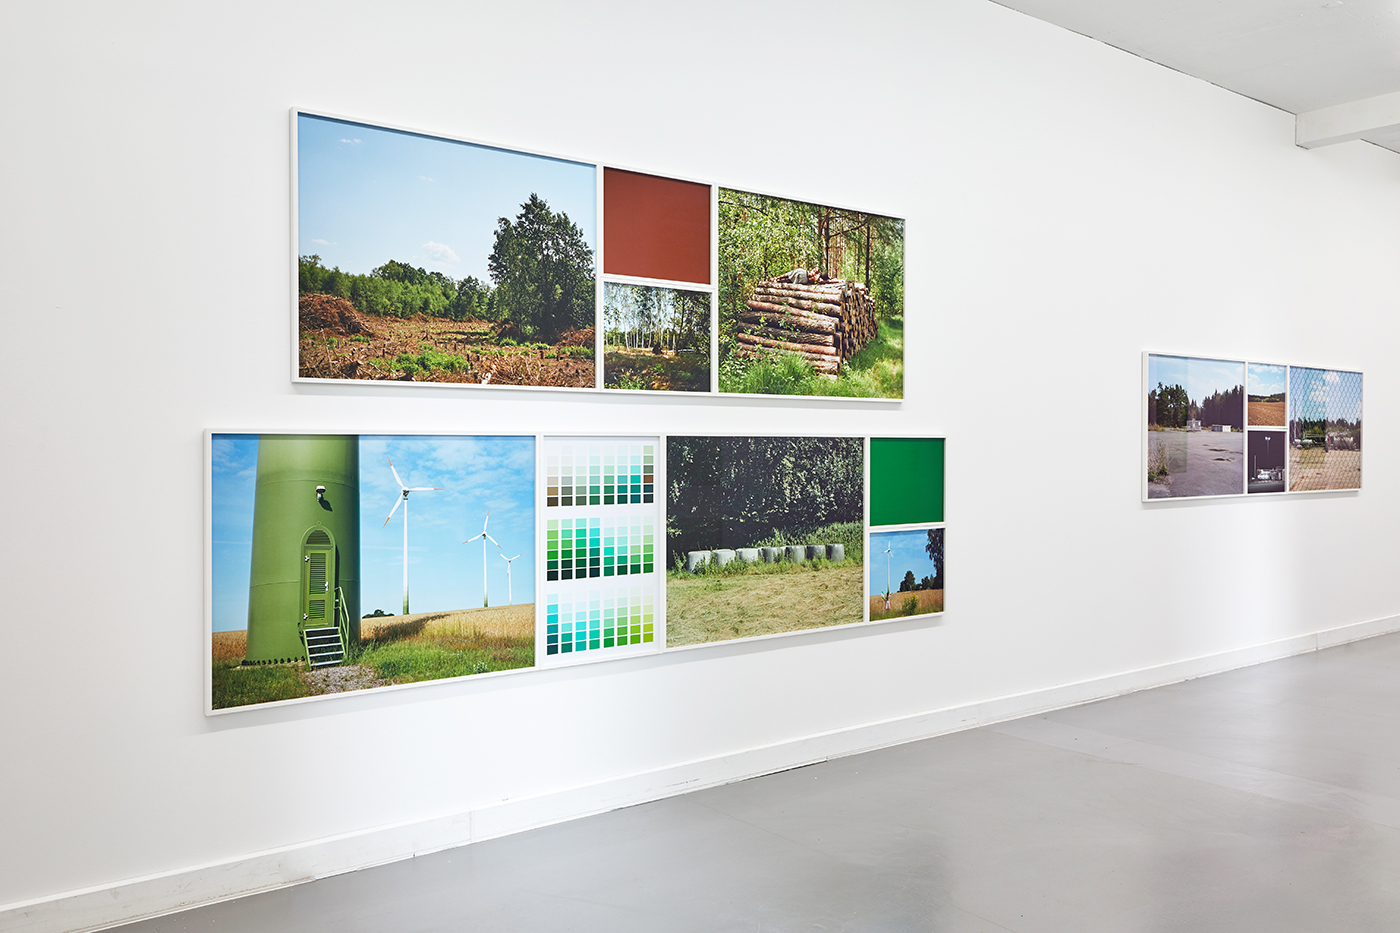 Otobong Nkanga - Emptied Remains (Color of Nature is definitely Green), 2004-2015